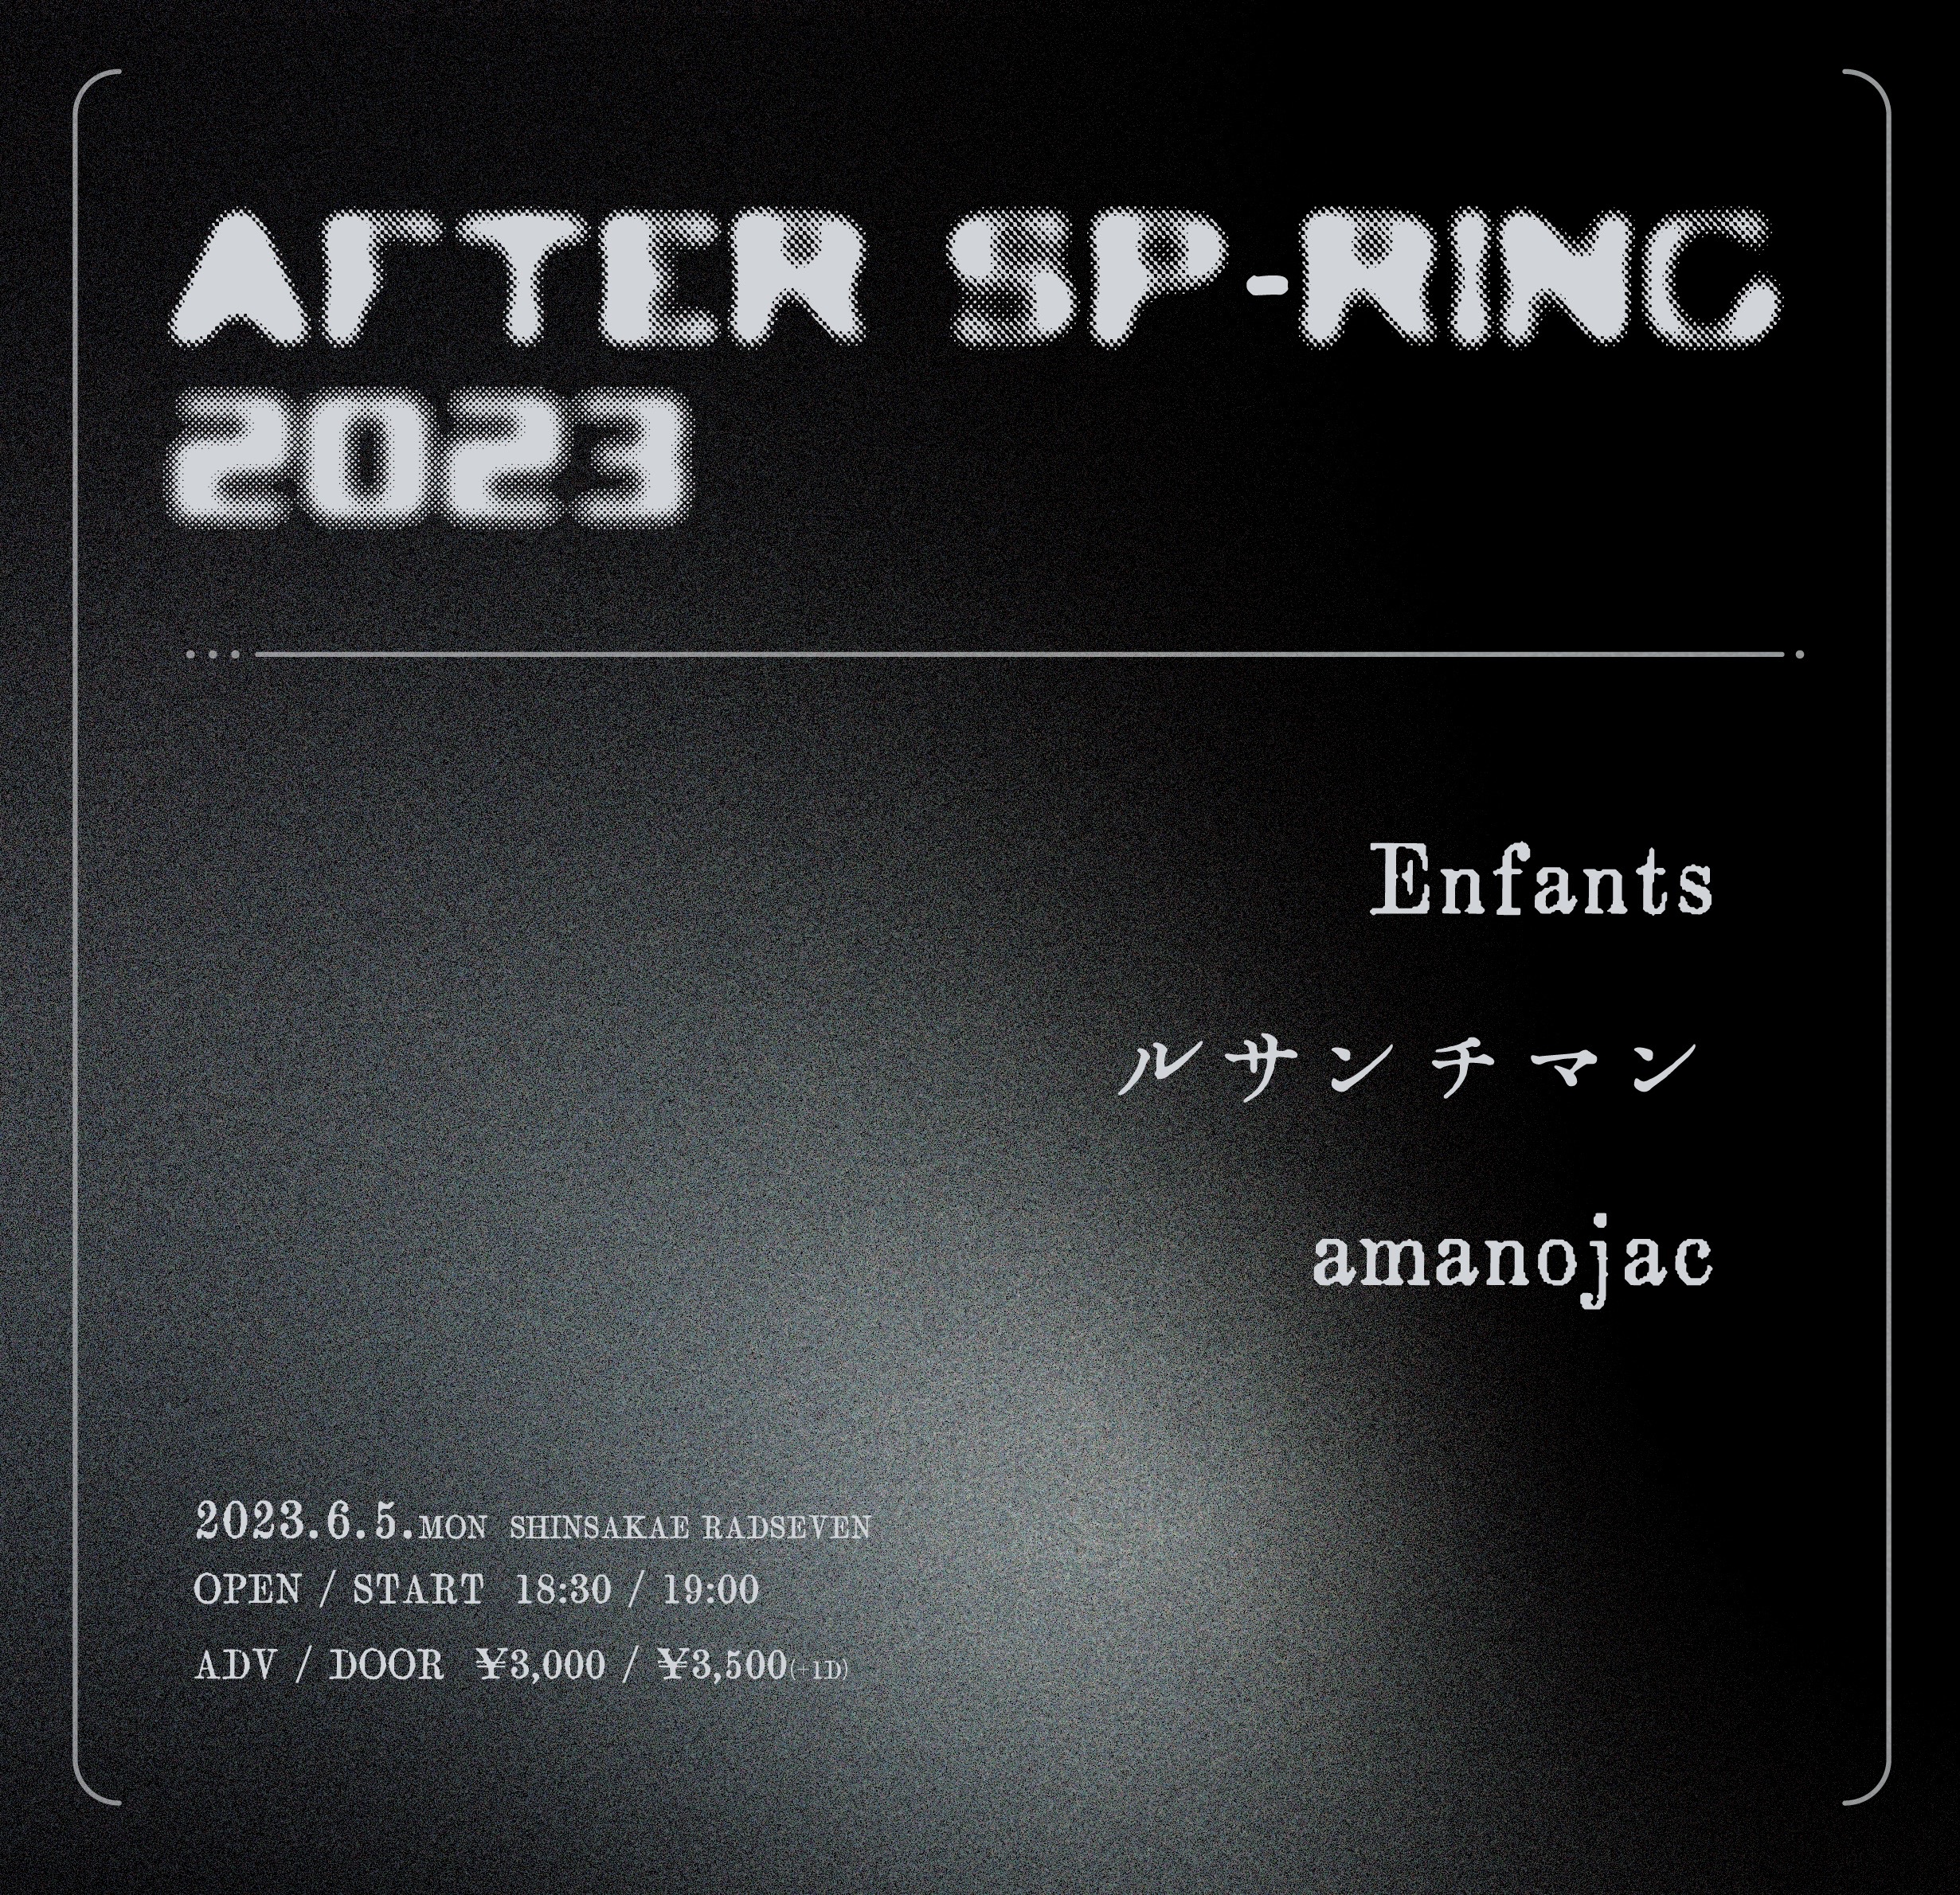 AFTER SP-RING 2023